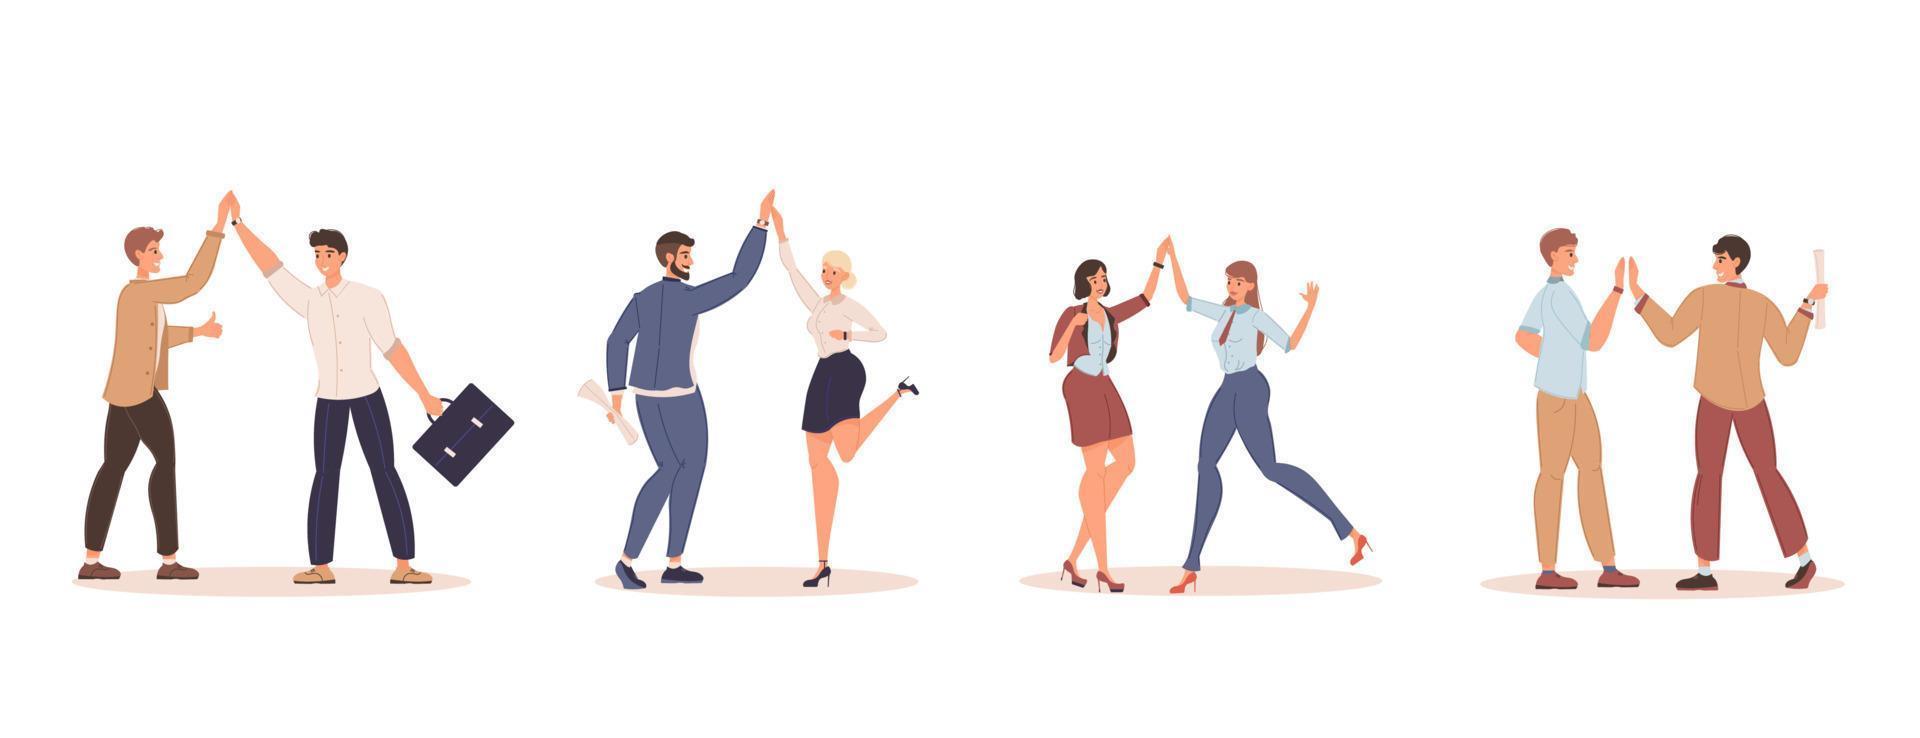 People colleague giving high five isolated set vector